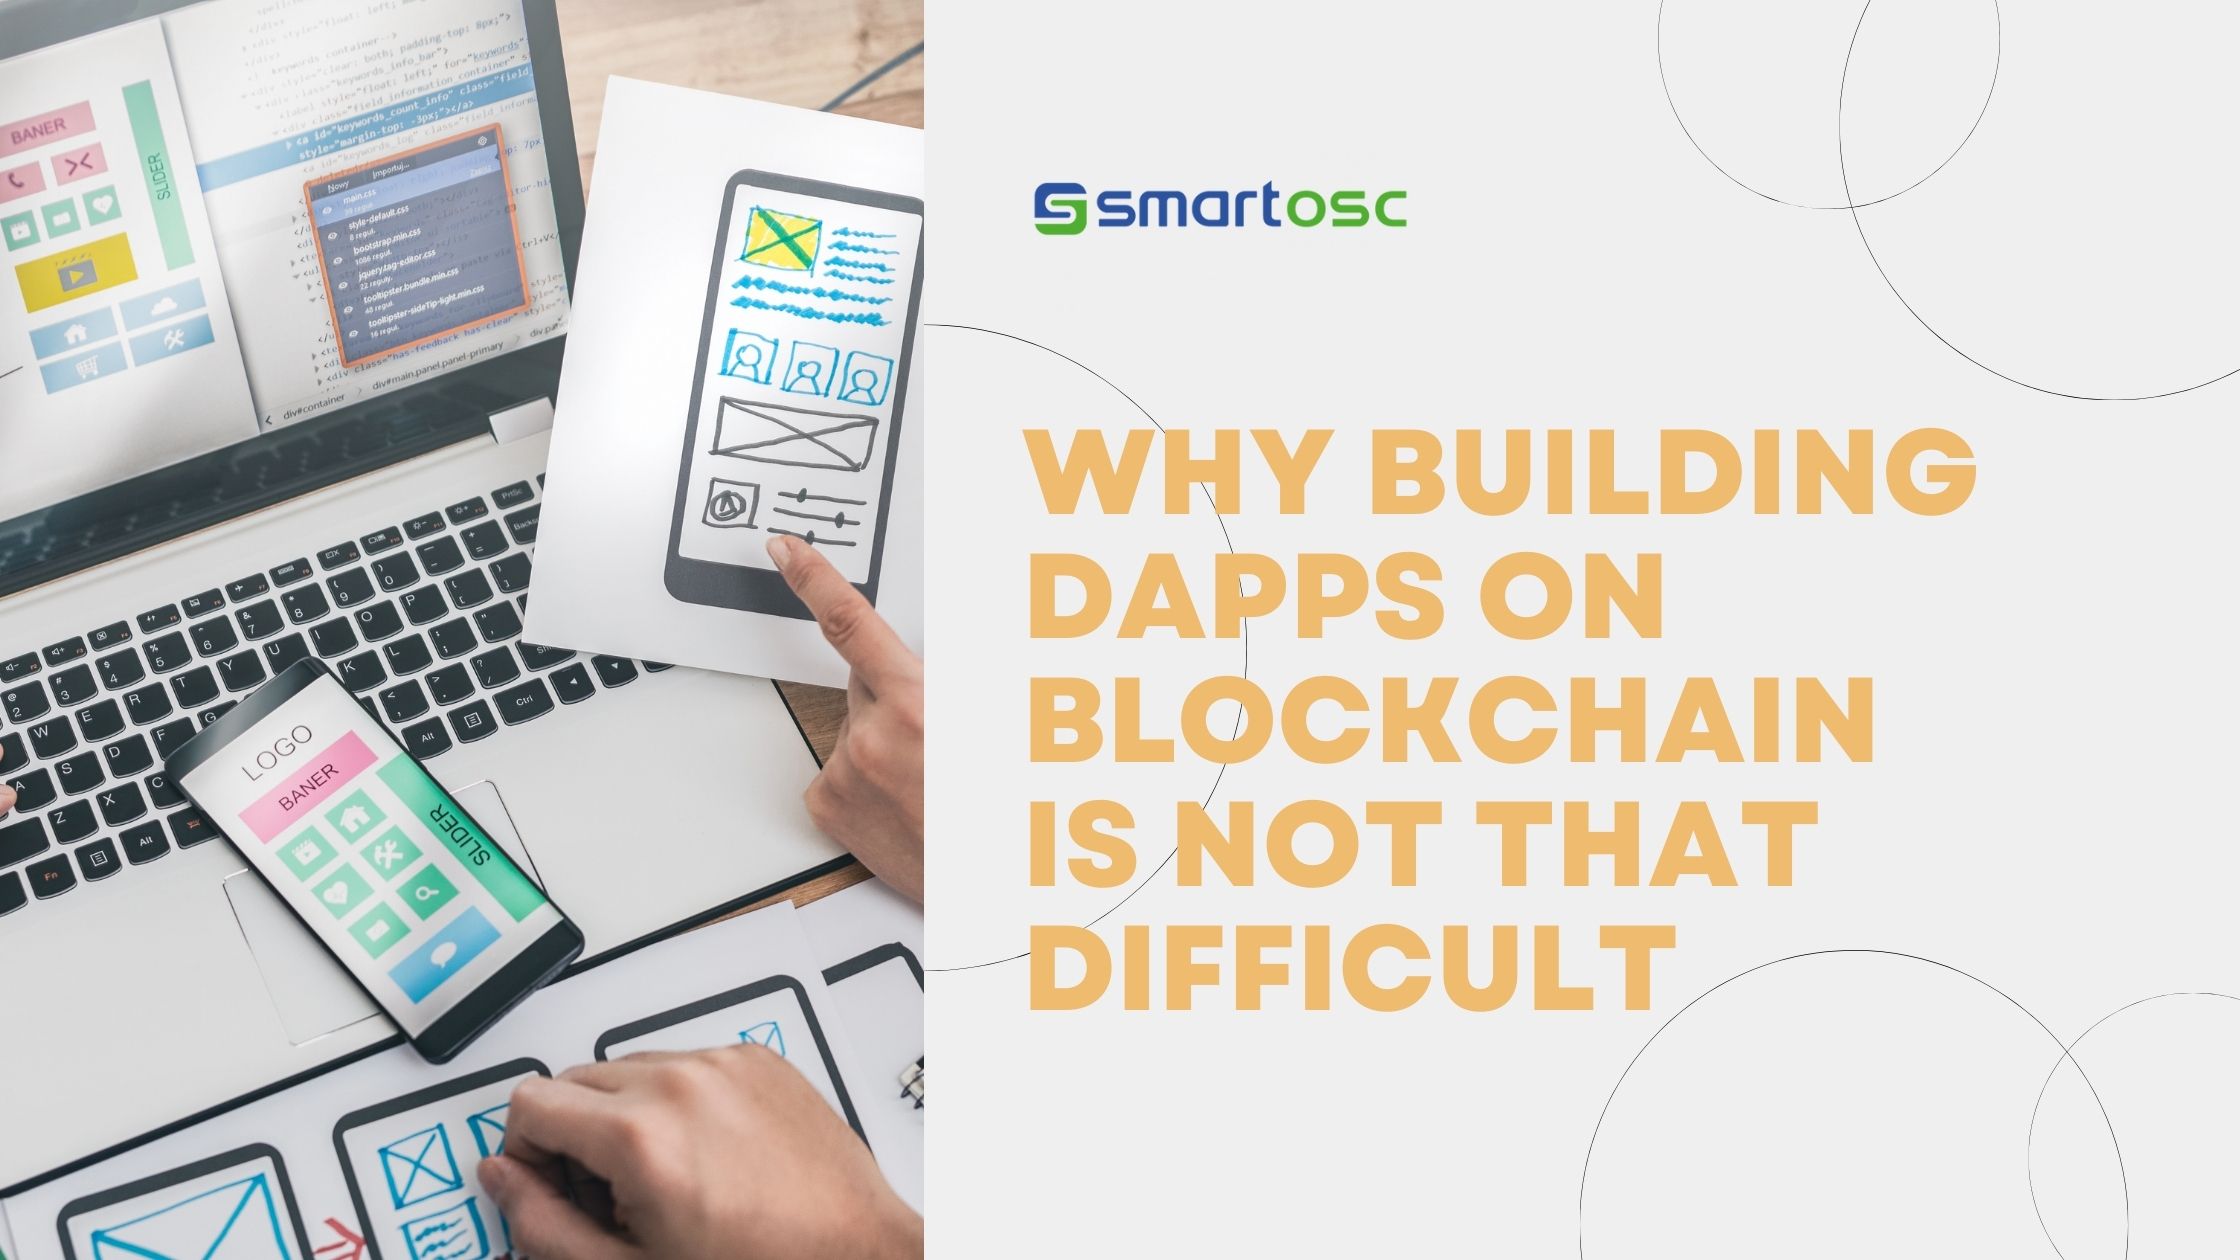 Why building dApps on blockchain is not THAT difficult